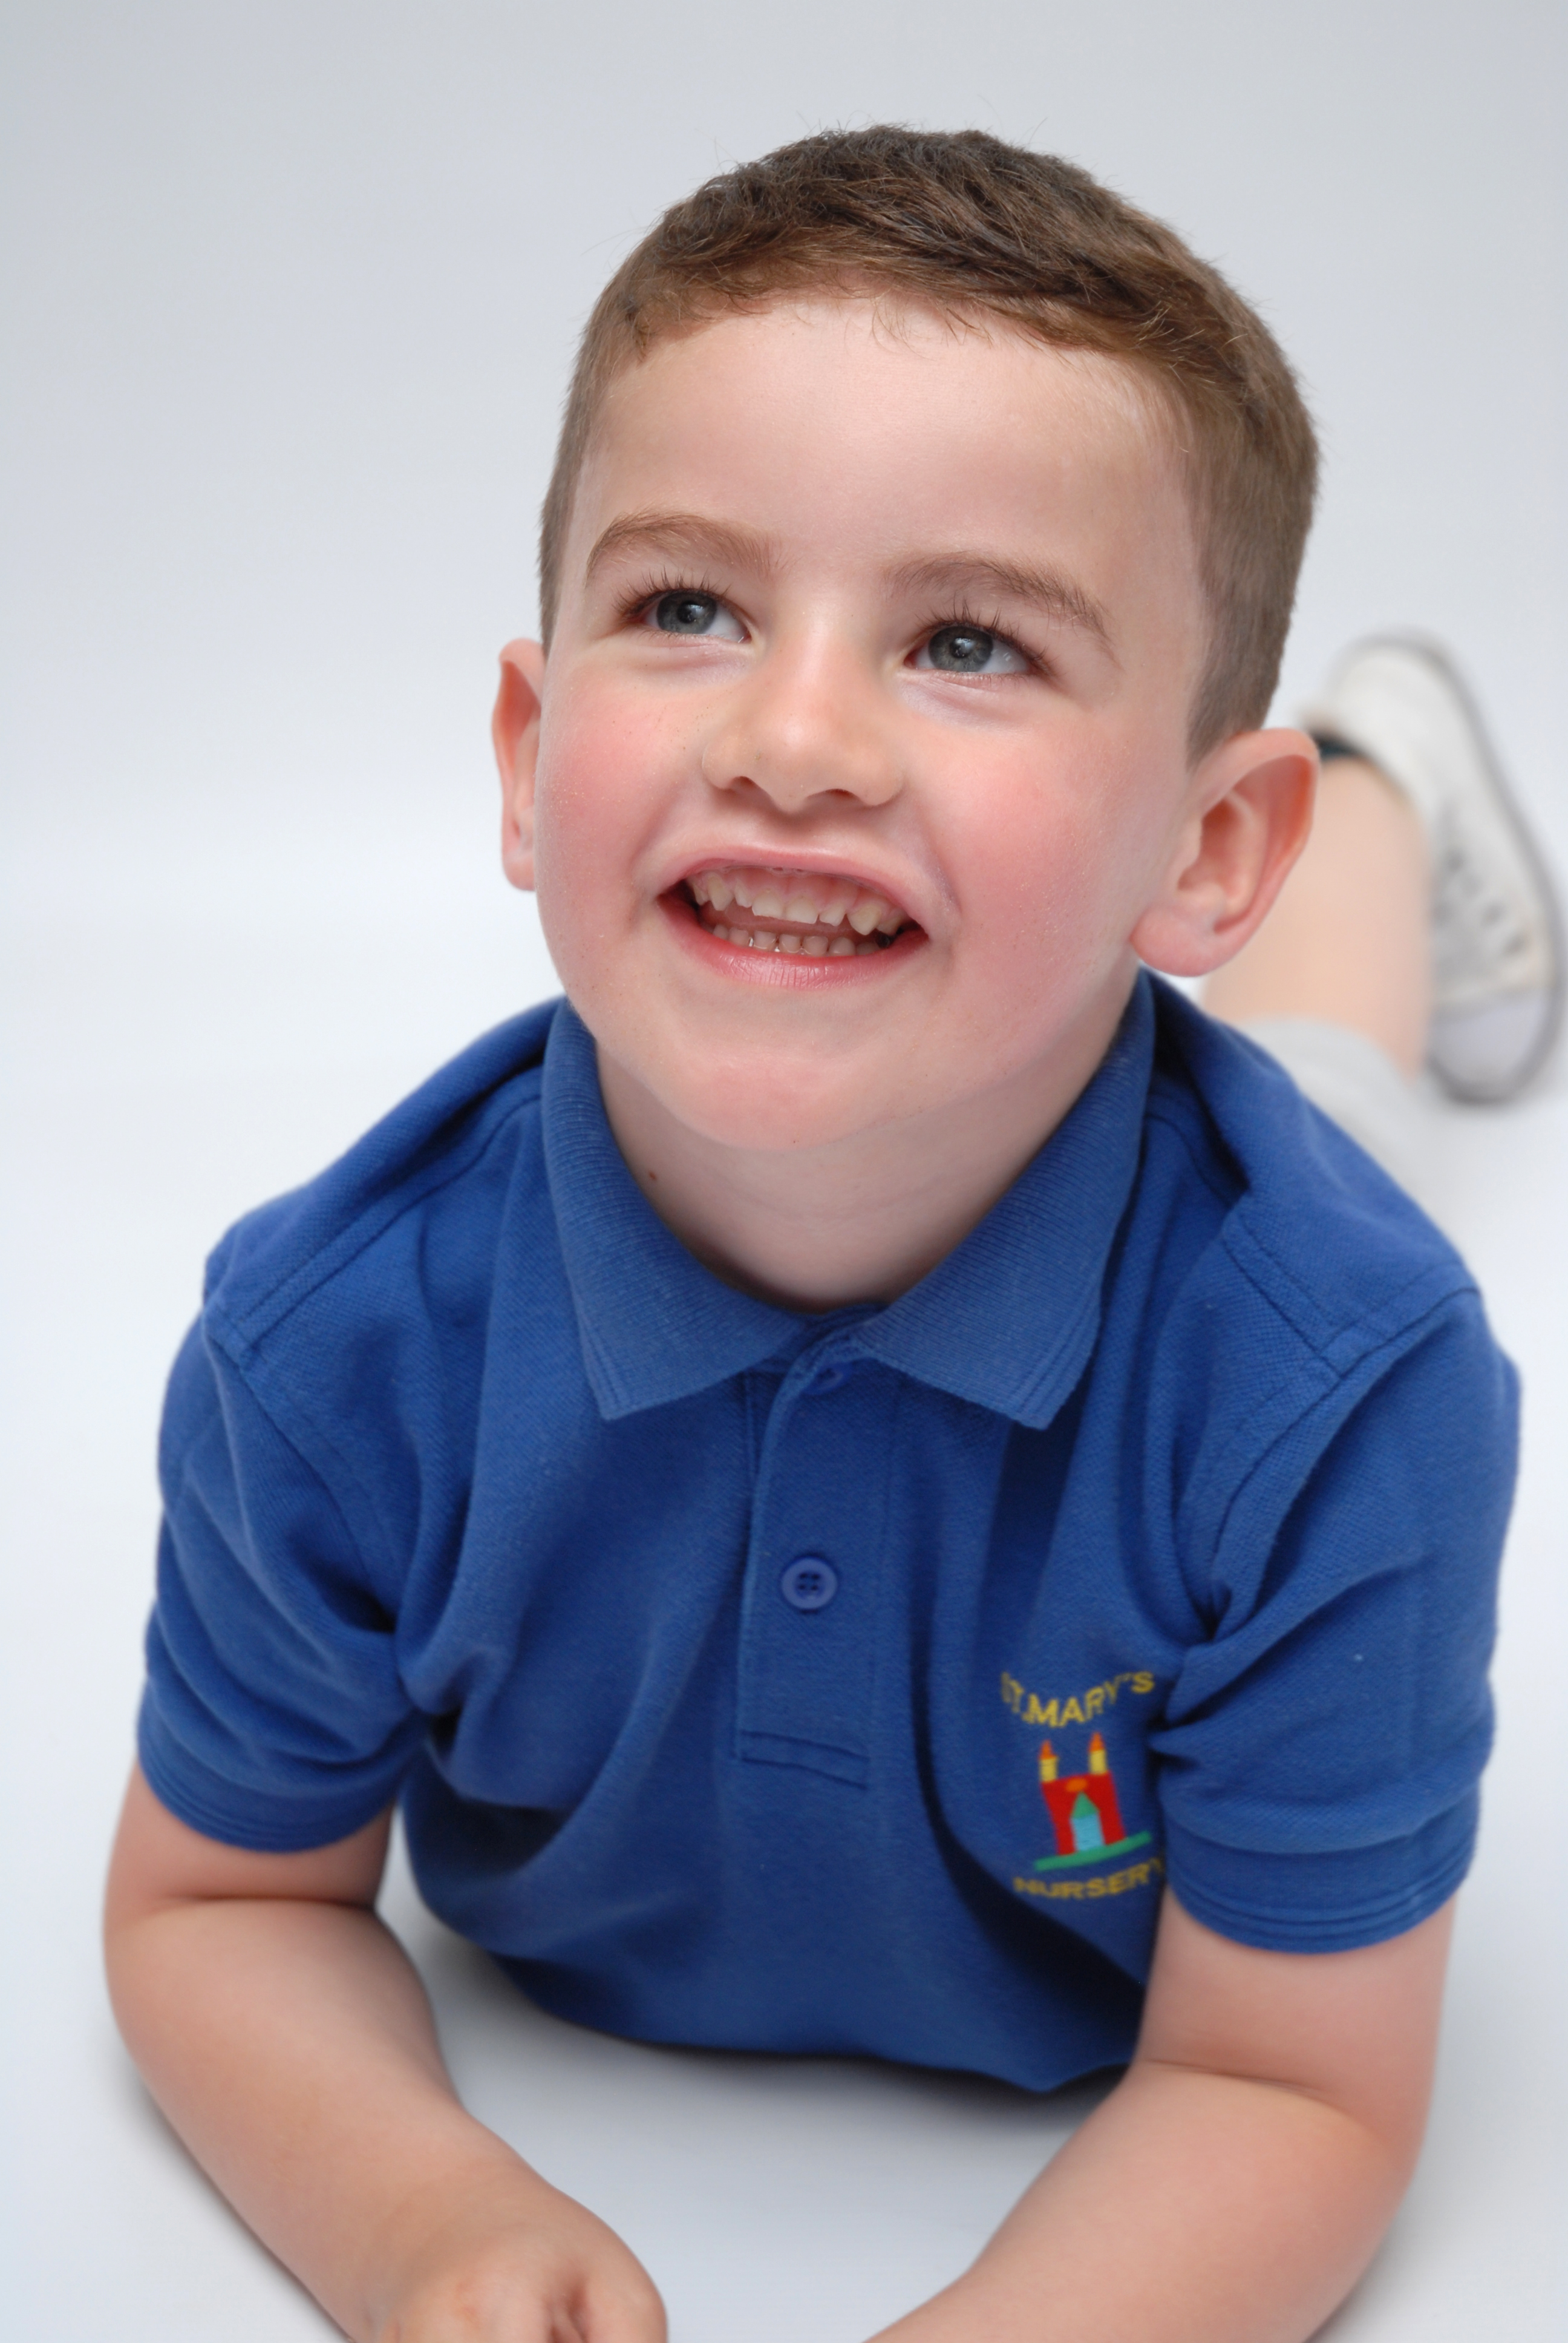 School Photography Packages